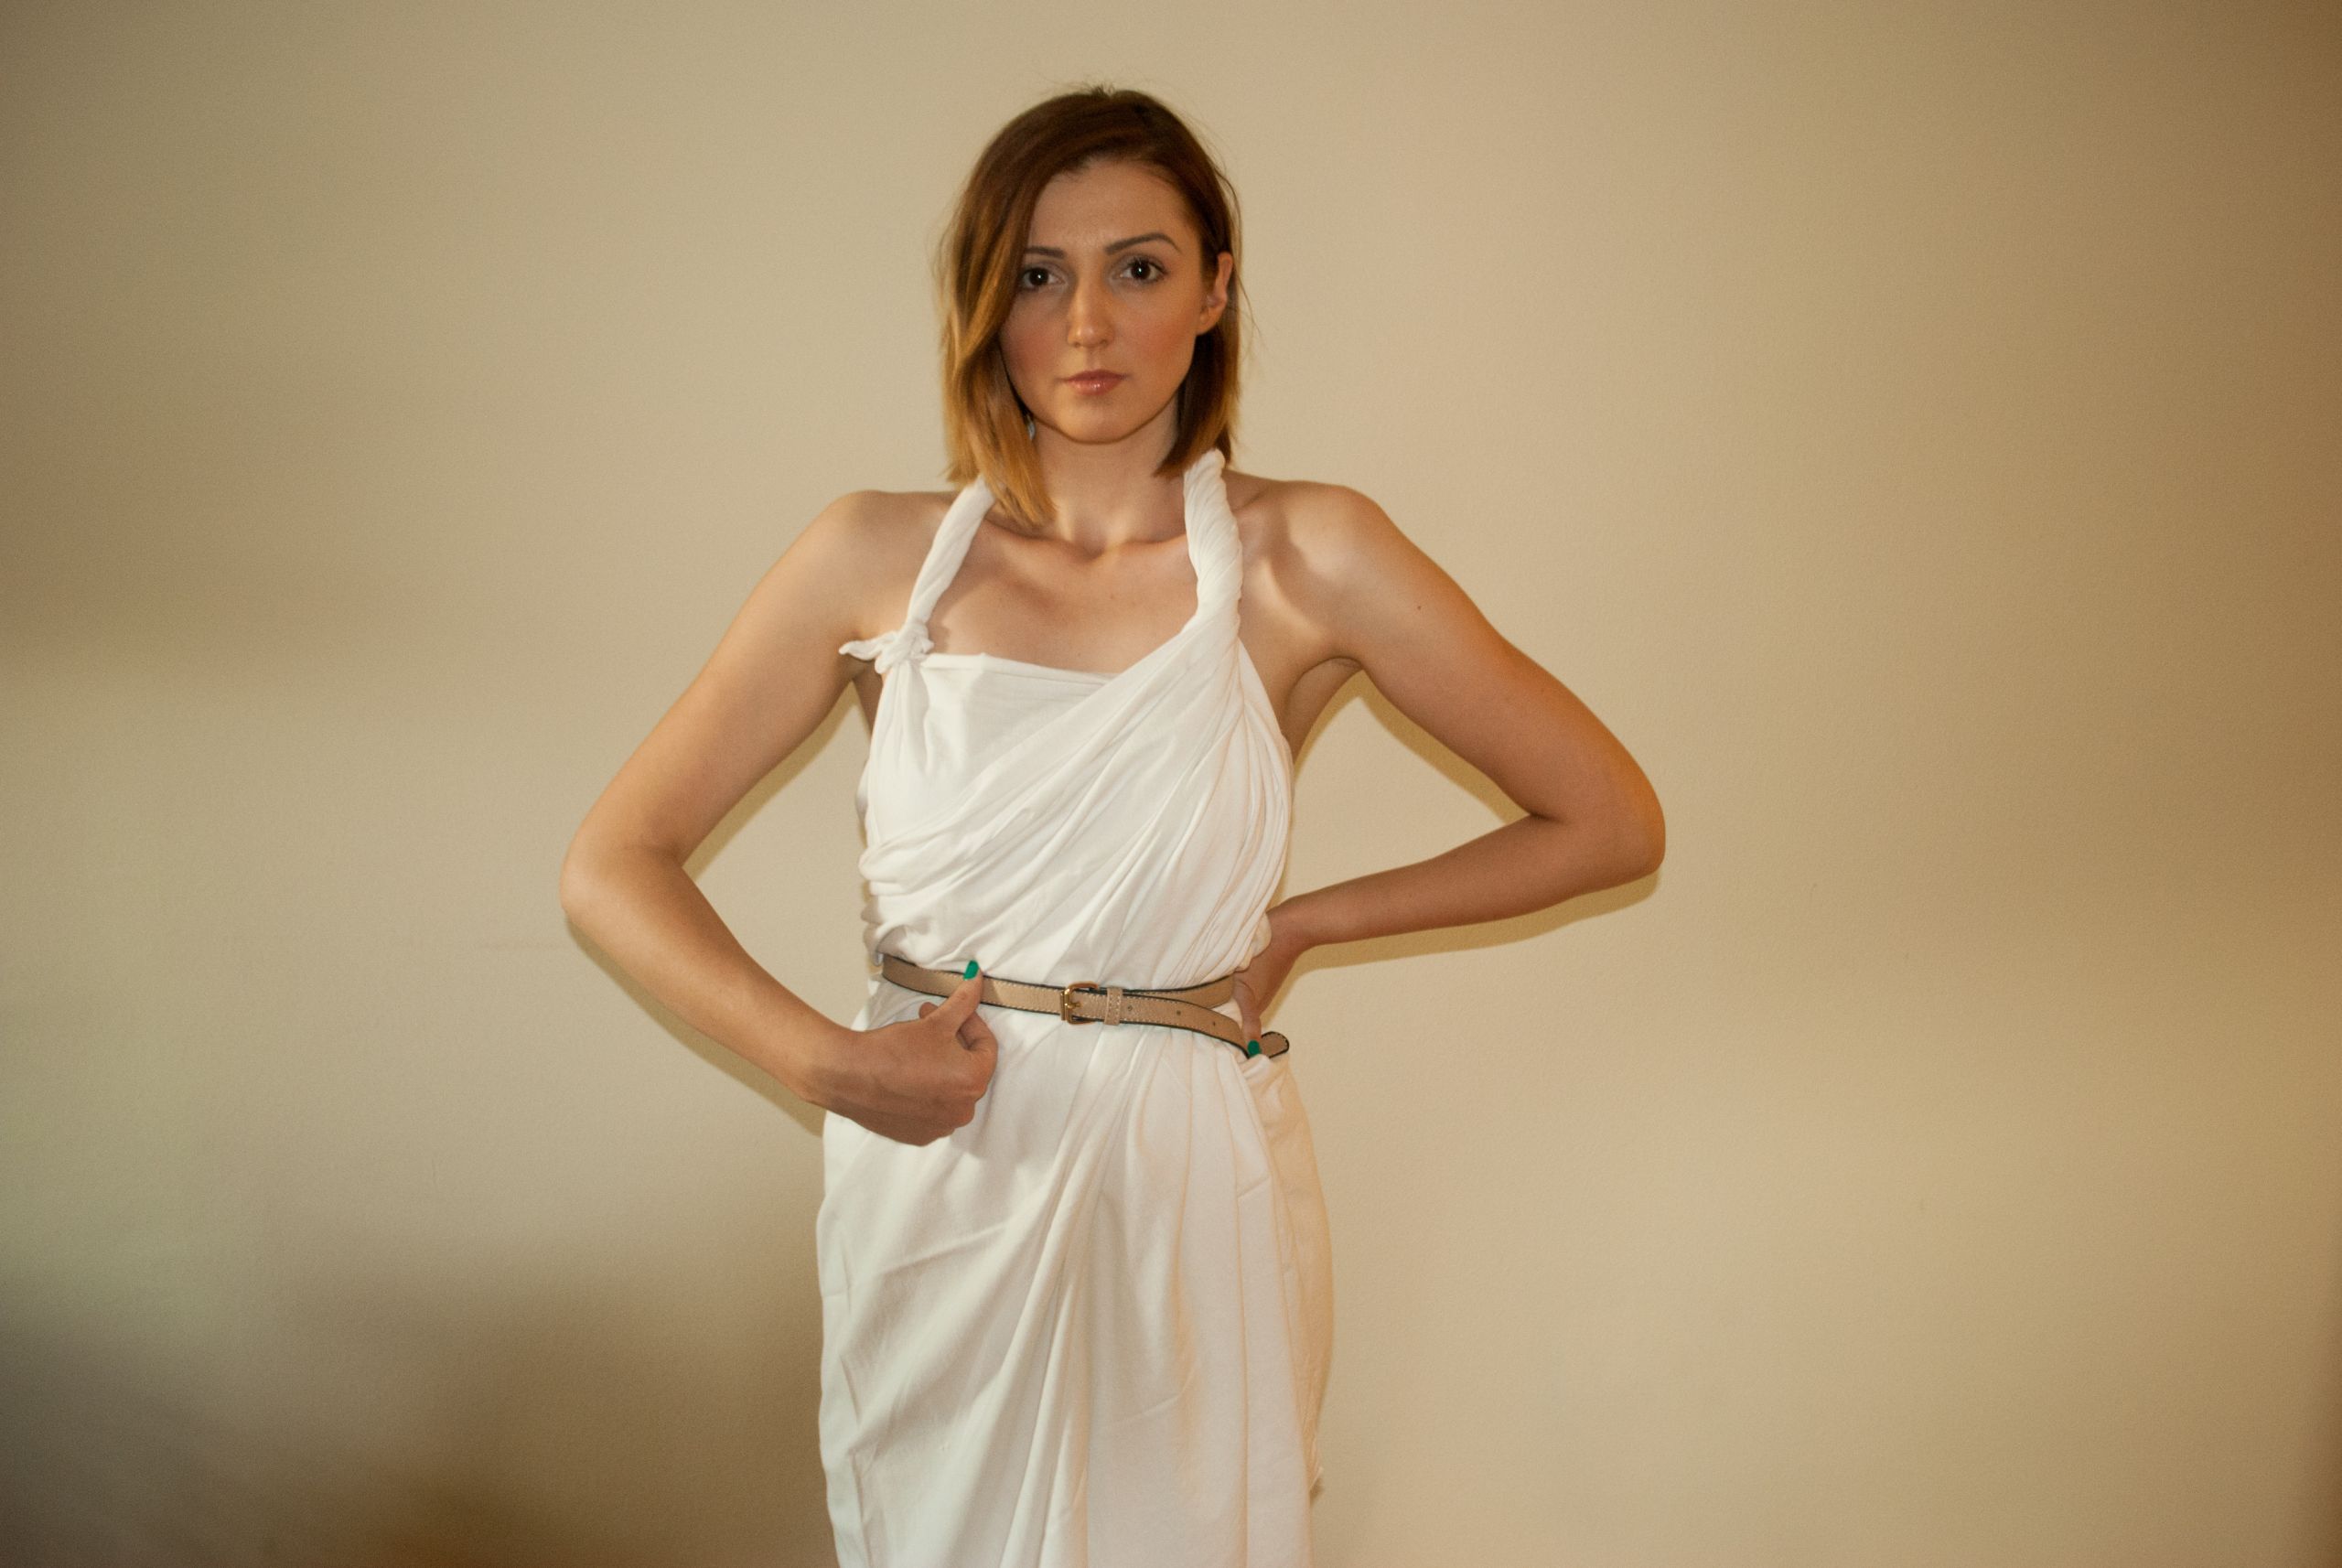 DIY Toga Costume
 2 Easy Ways to Make a Female Toga with wikiHow